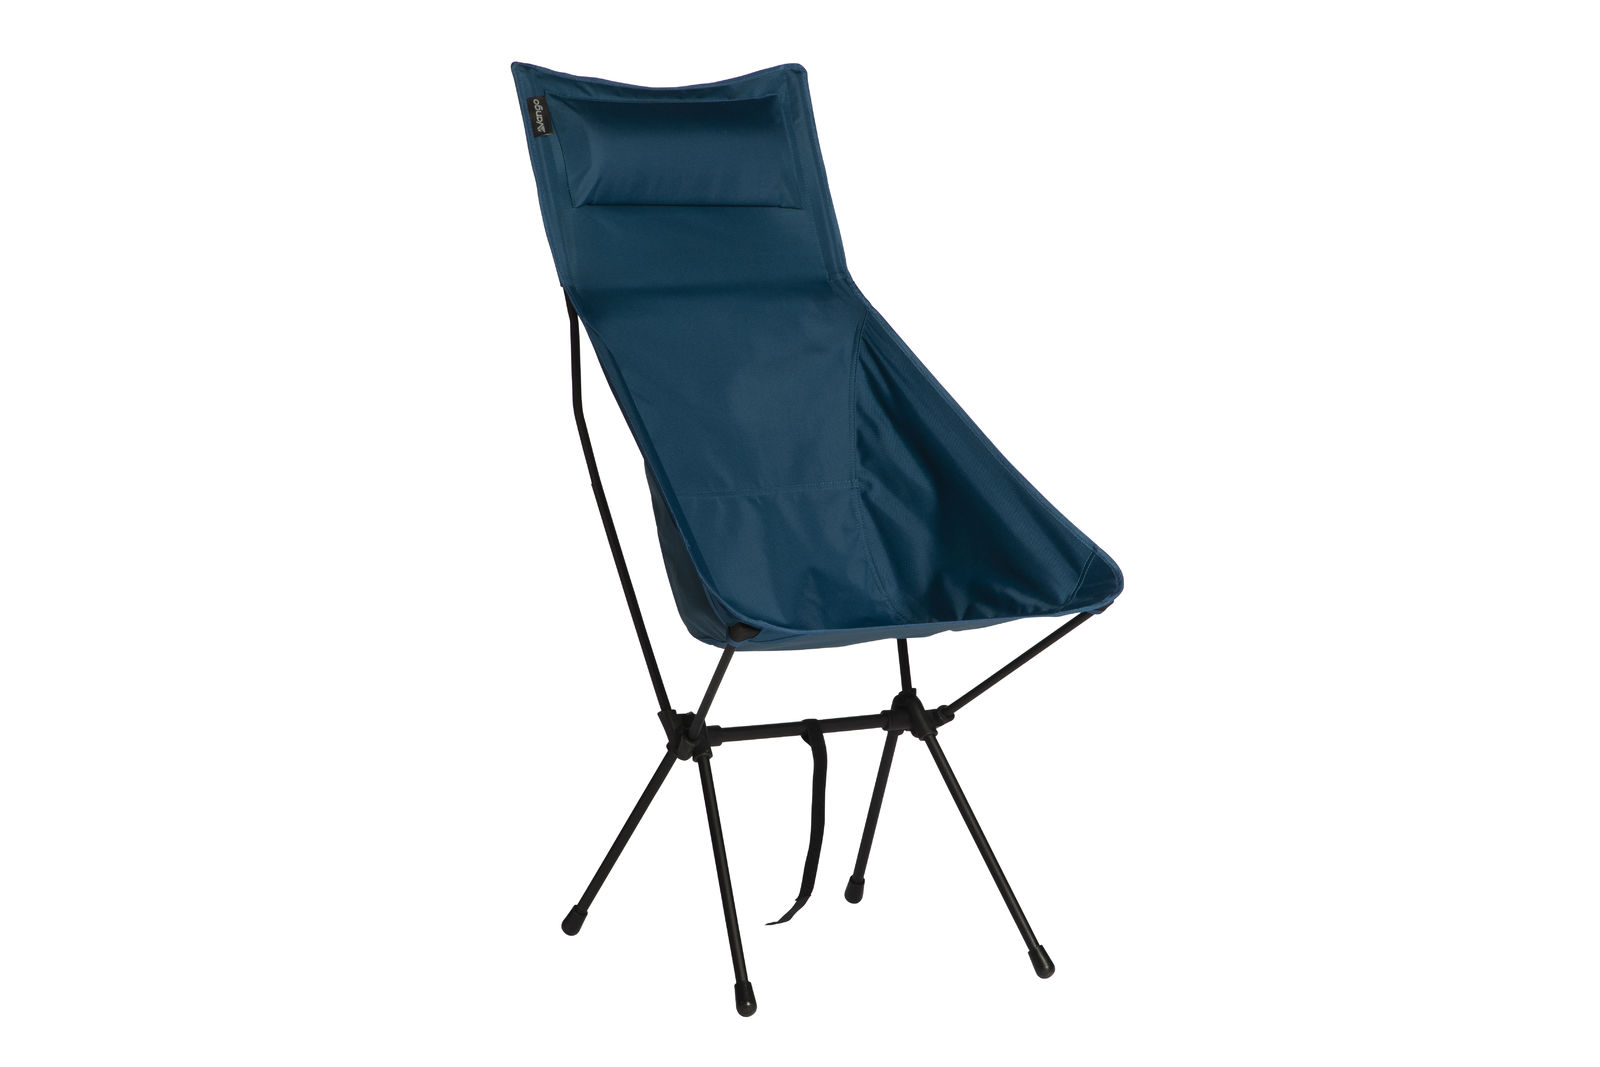 Compact Travel Stool with Headrest – Vango Micro Steel Tall Chair